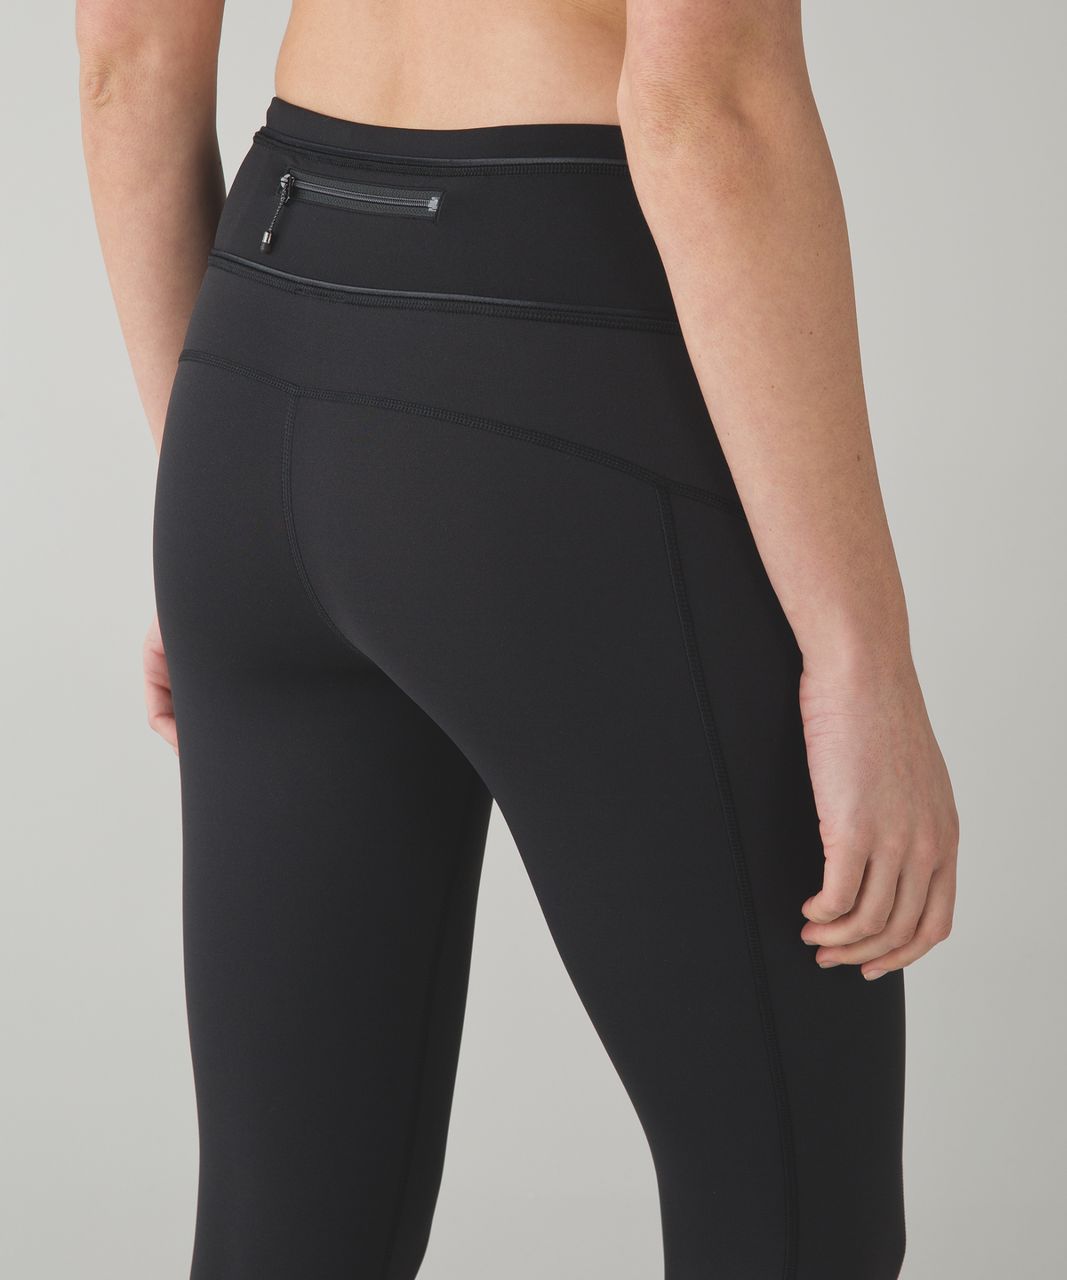 Lululemon Pace Queen Tight - Black